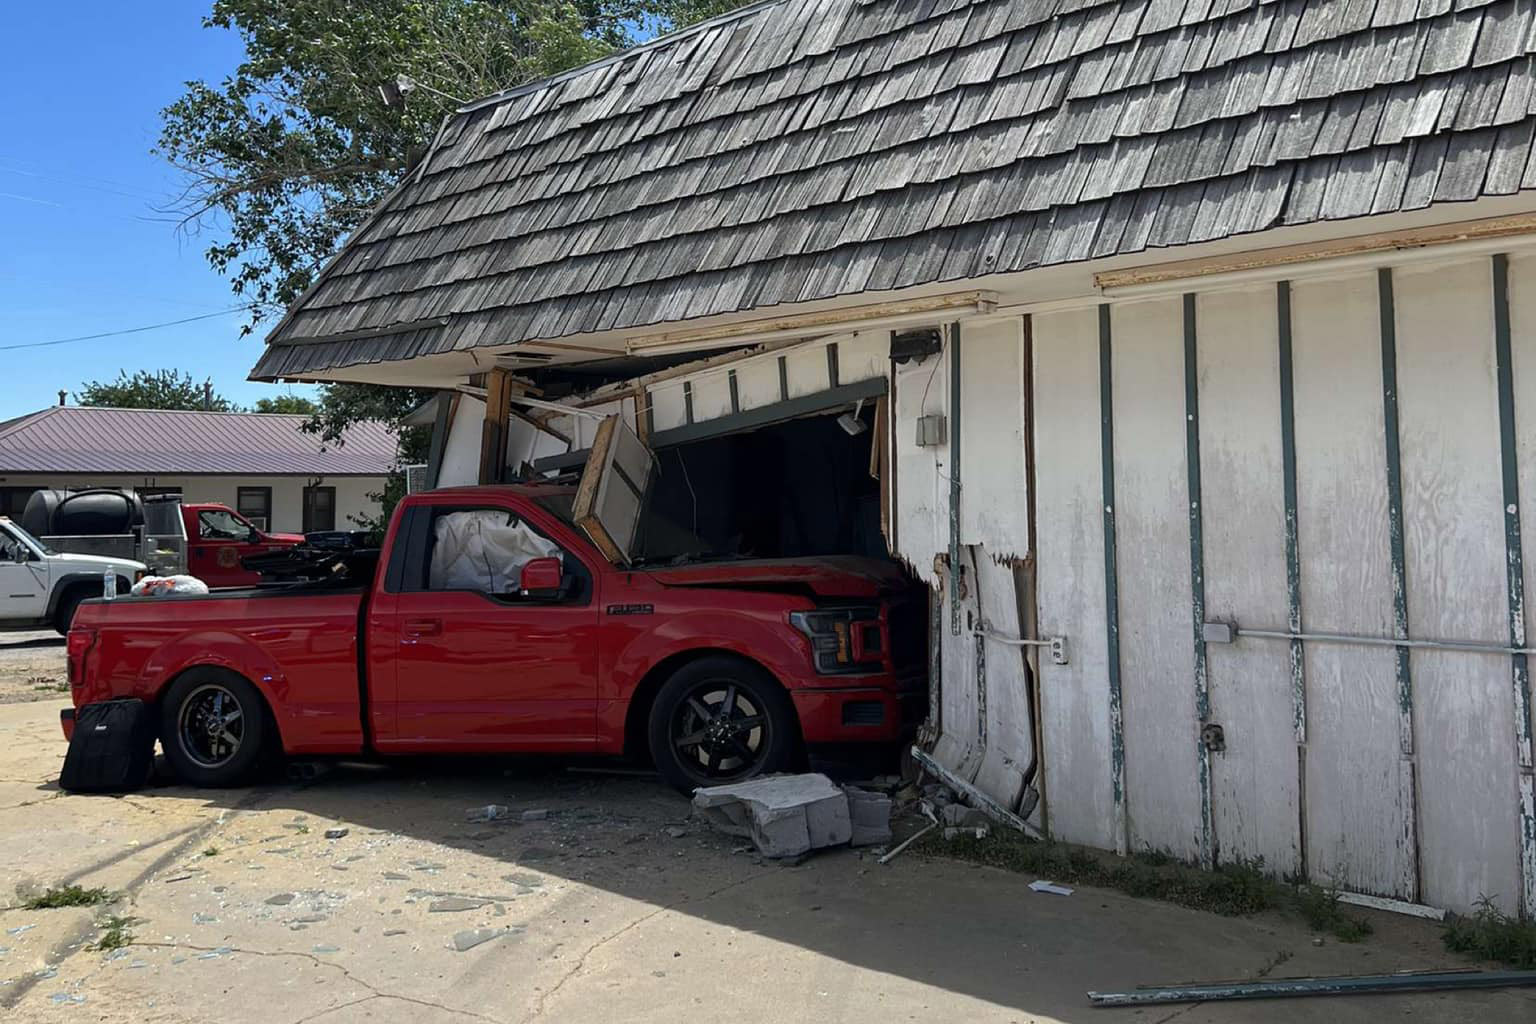 PICT A pickup crashed into a building in Eads June 23, 2022 - KCSO